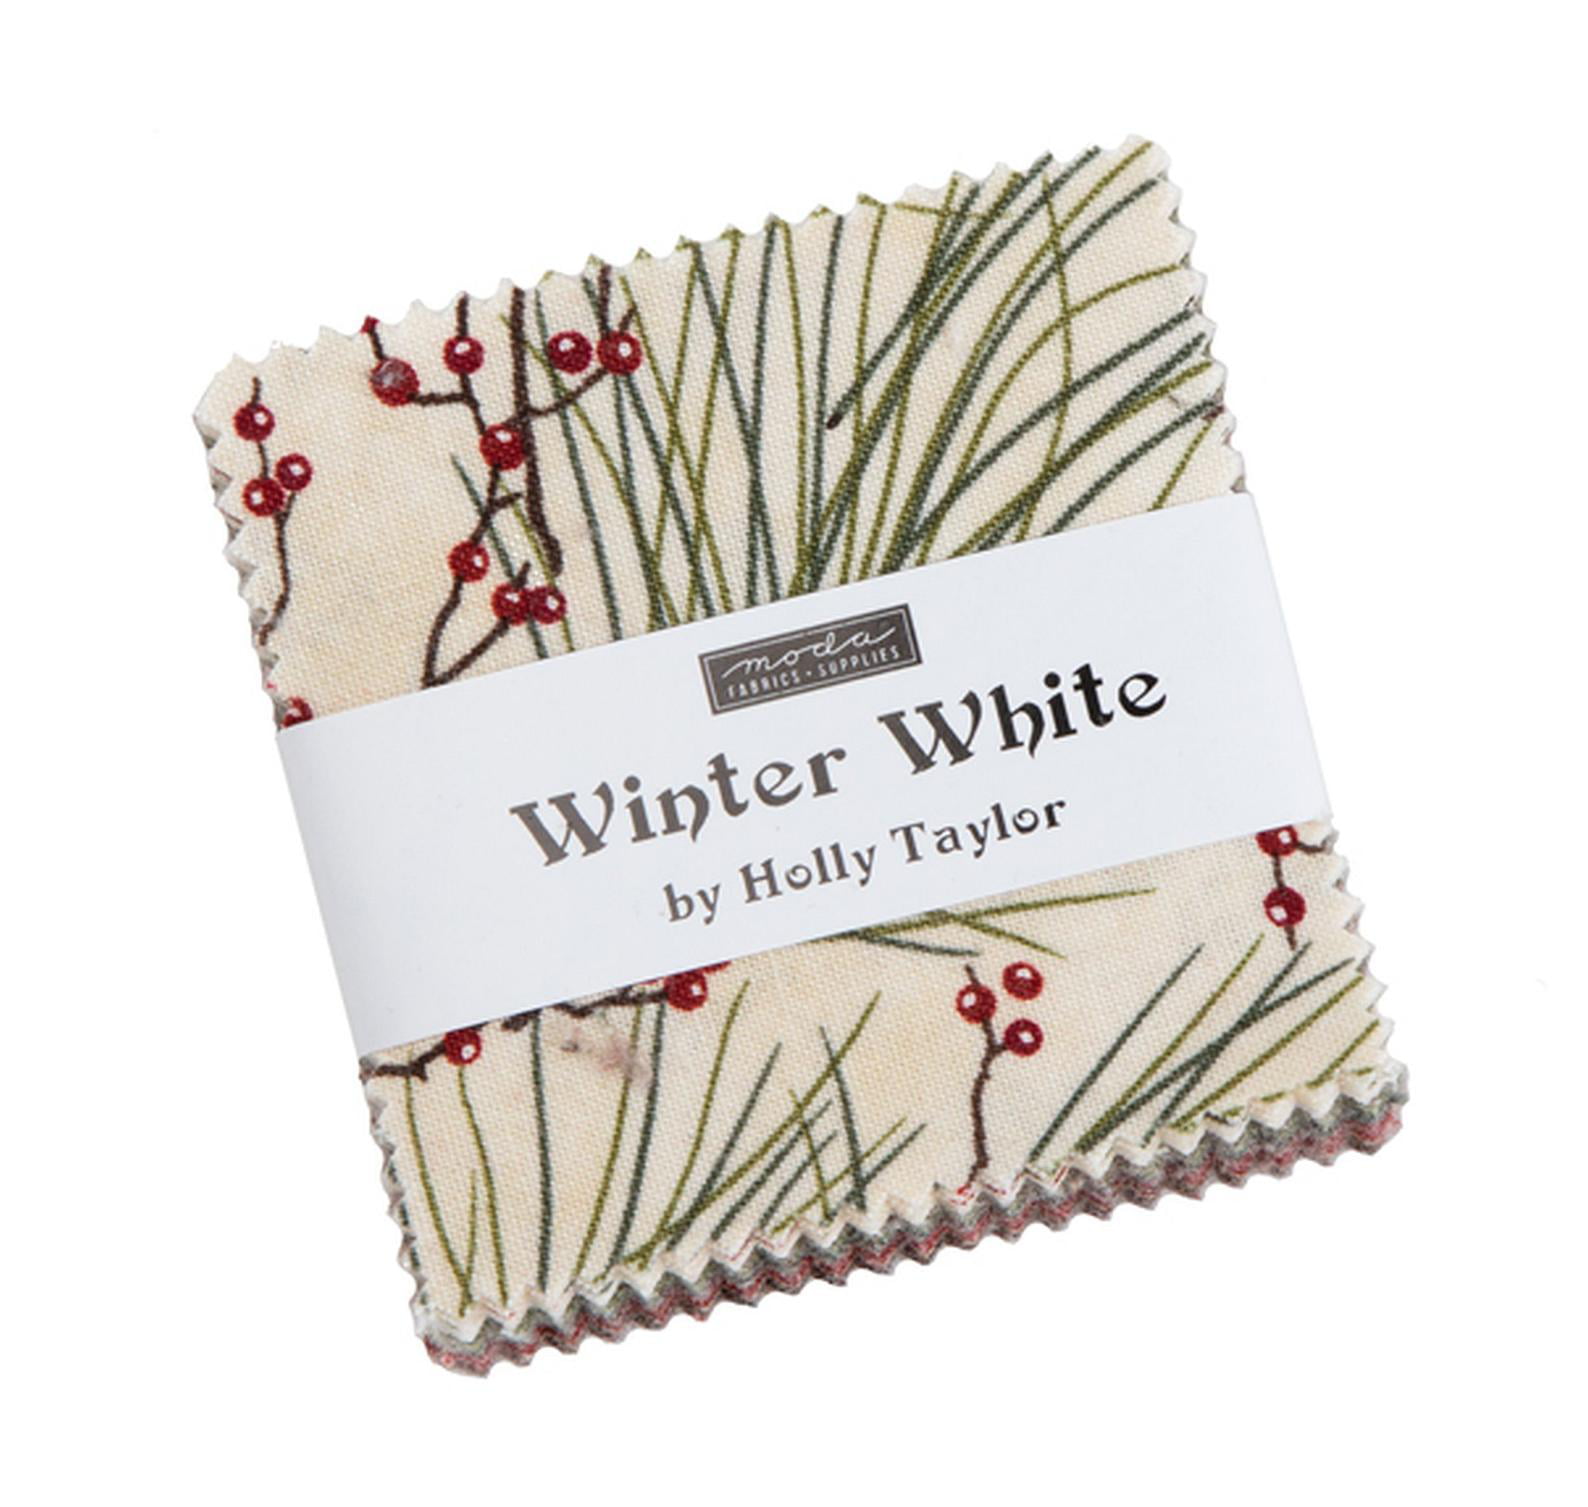 Moda Winter White Charm Pack by Holly Taylor 100% cotton fabric